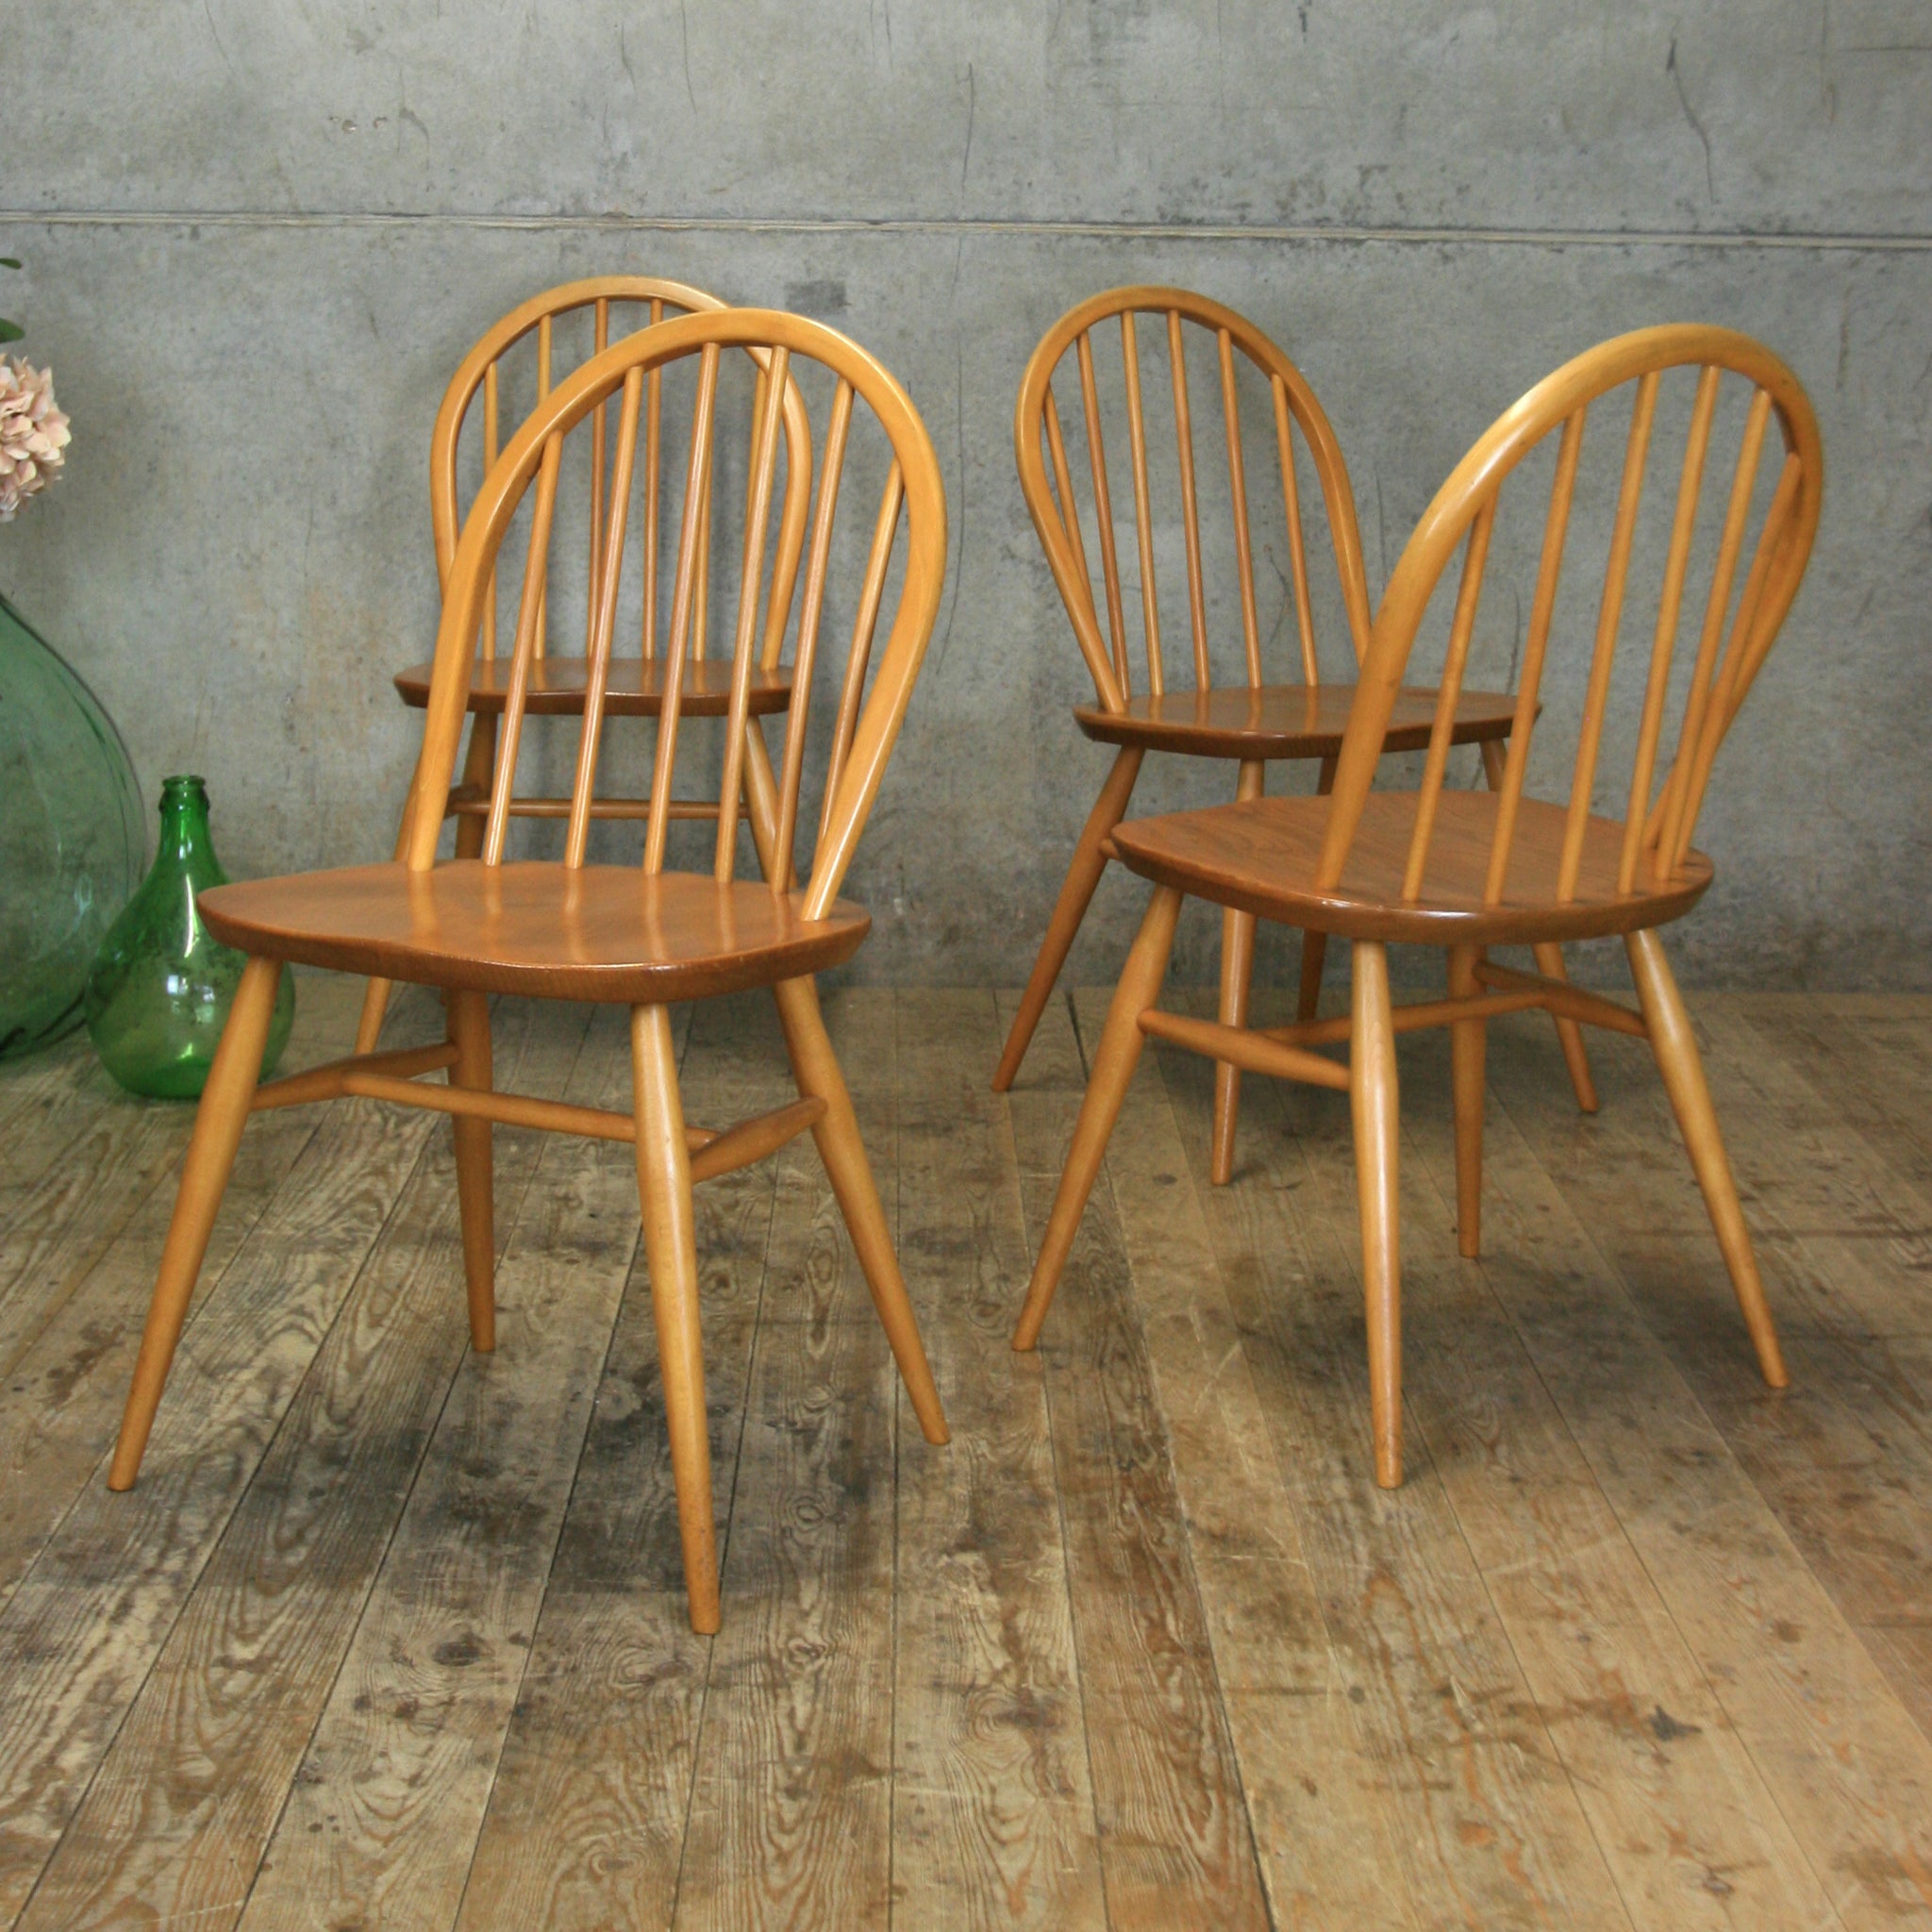 X4 Ercol Windsor Chairs 0706c Mustard Vintage